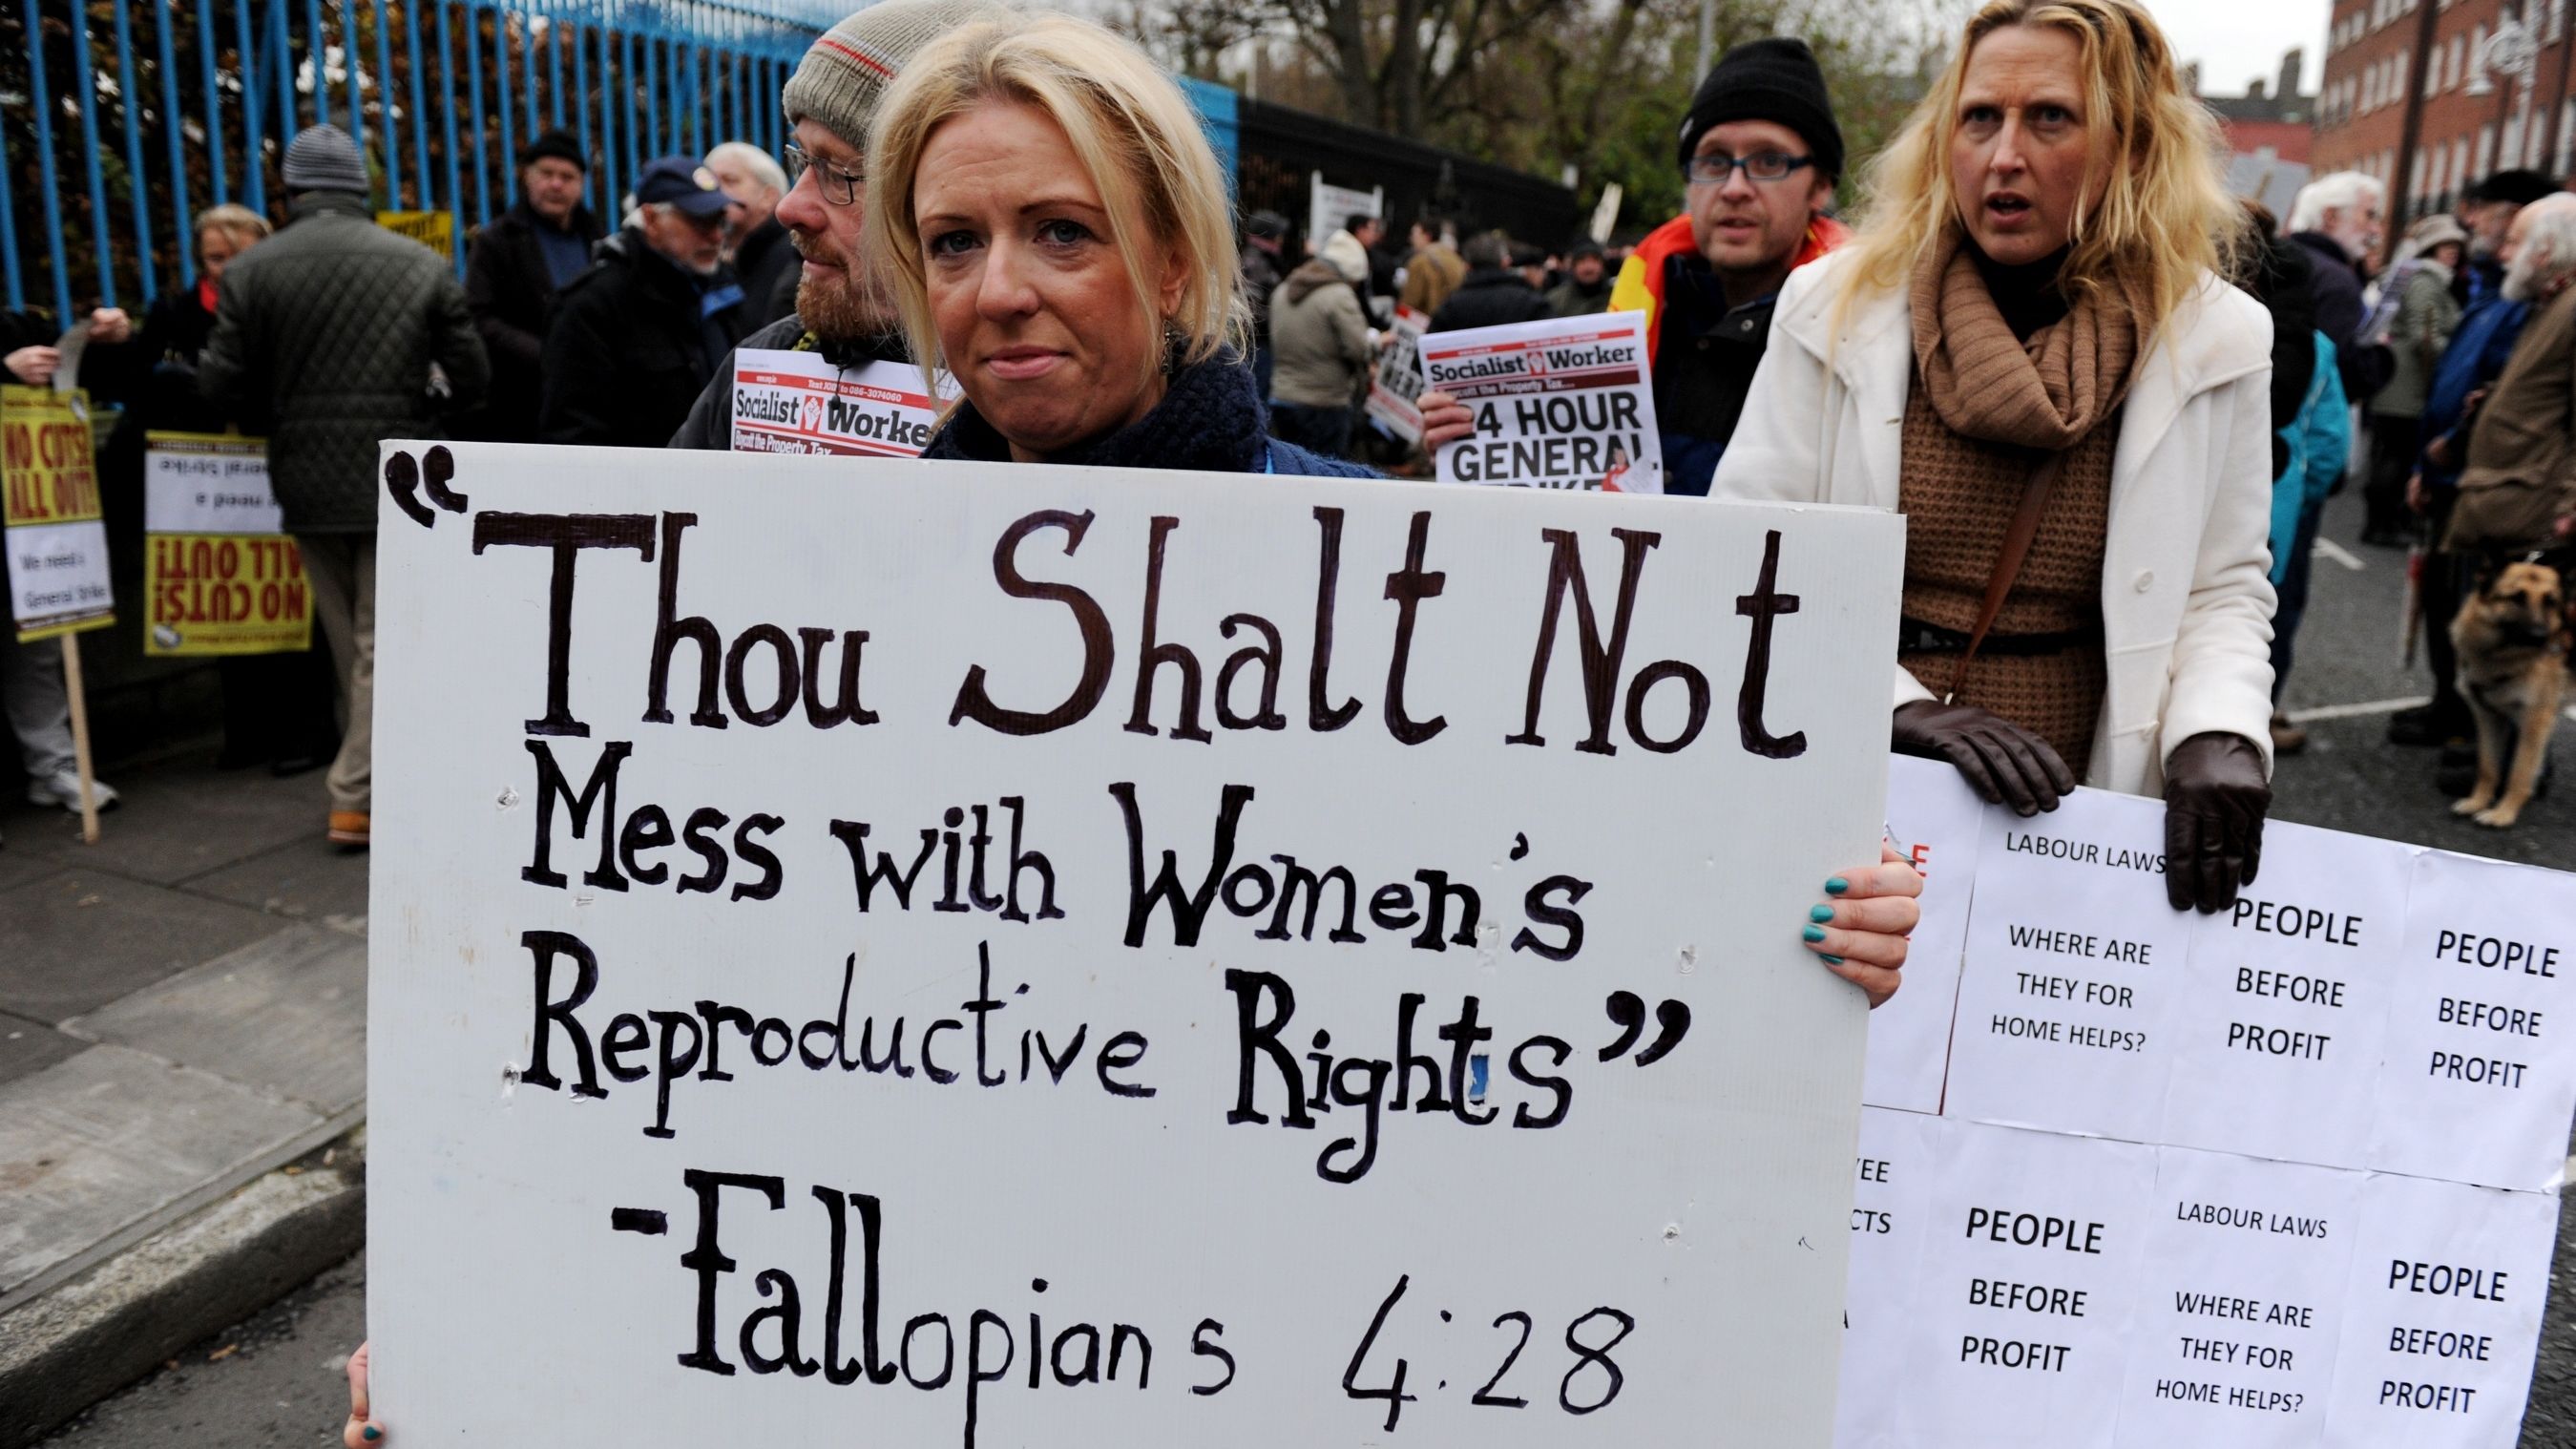 Protest against Ireland's abortion laws in Dublin, Ireland on November 24, 2012. 